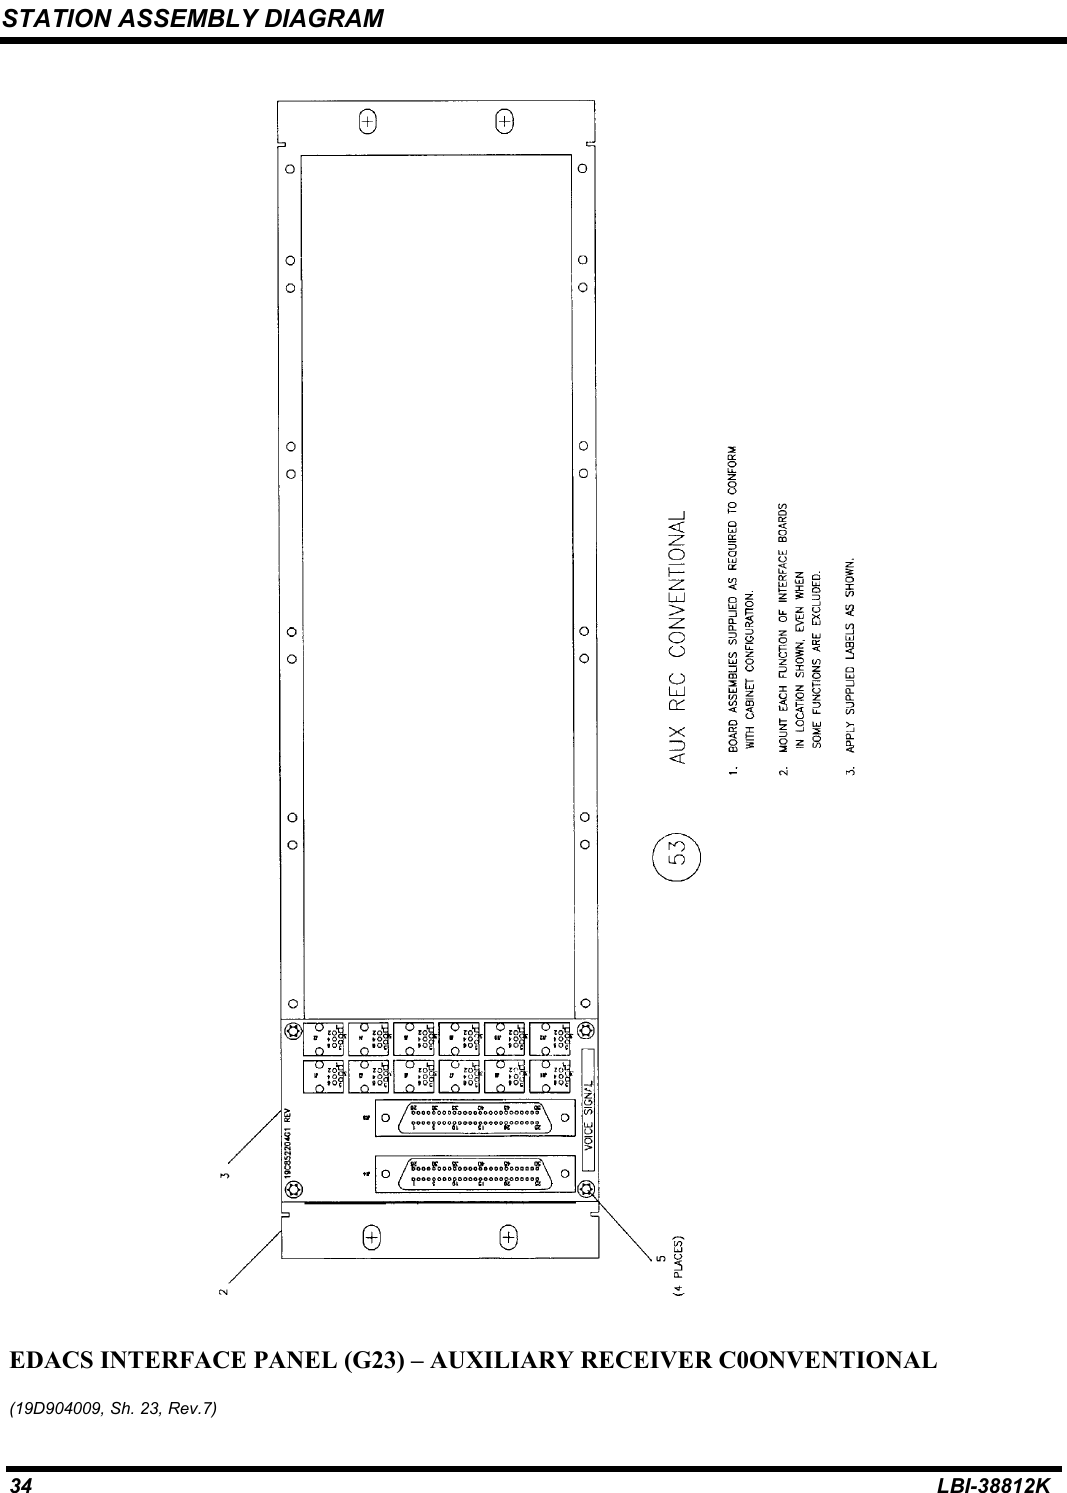 STATION ASSEMBLY DIAGRAM34 LBI-38812KEDACS INTERFACE PANEL (G23) – AUXILIARY RECEIVER C0ONVENTIONAL(19D904009, Sh. 23, Rev.7)